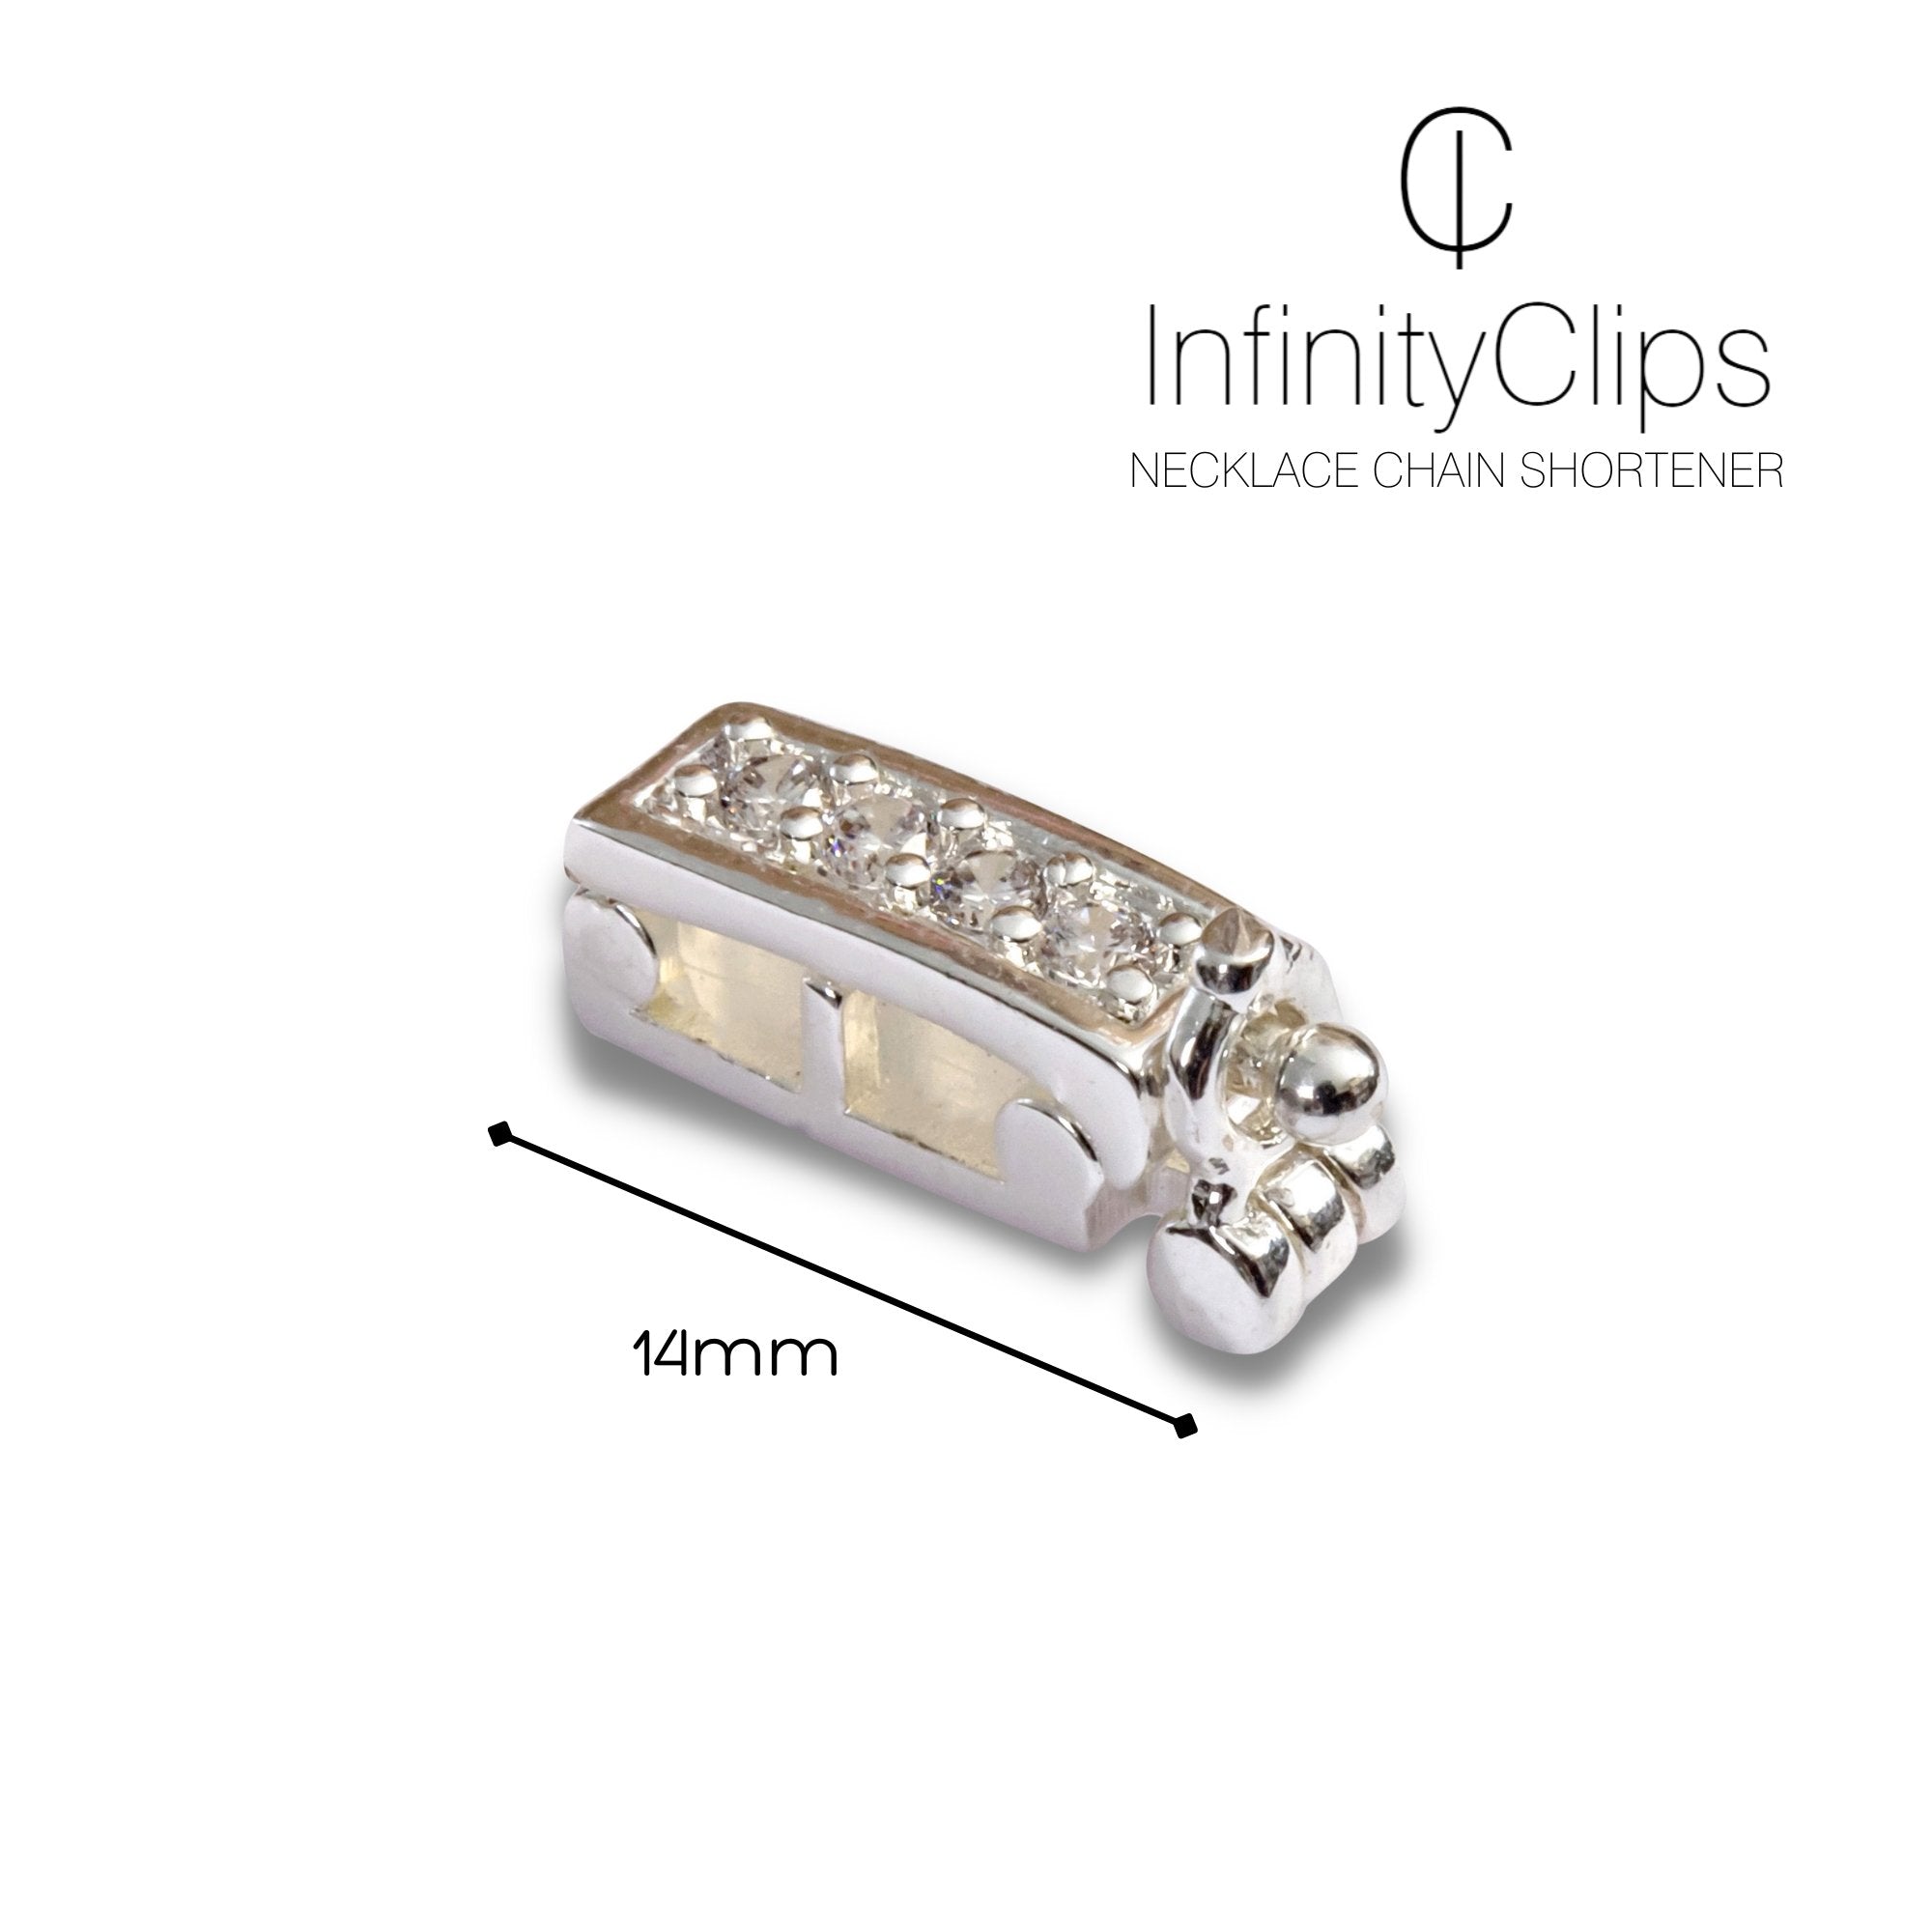 Large Classic Necklace Shortener (Silver/Gold/Rose Gold) | InfinityClips Gold